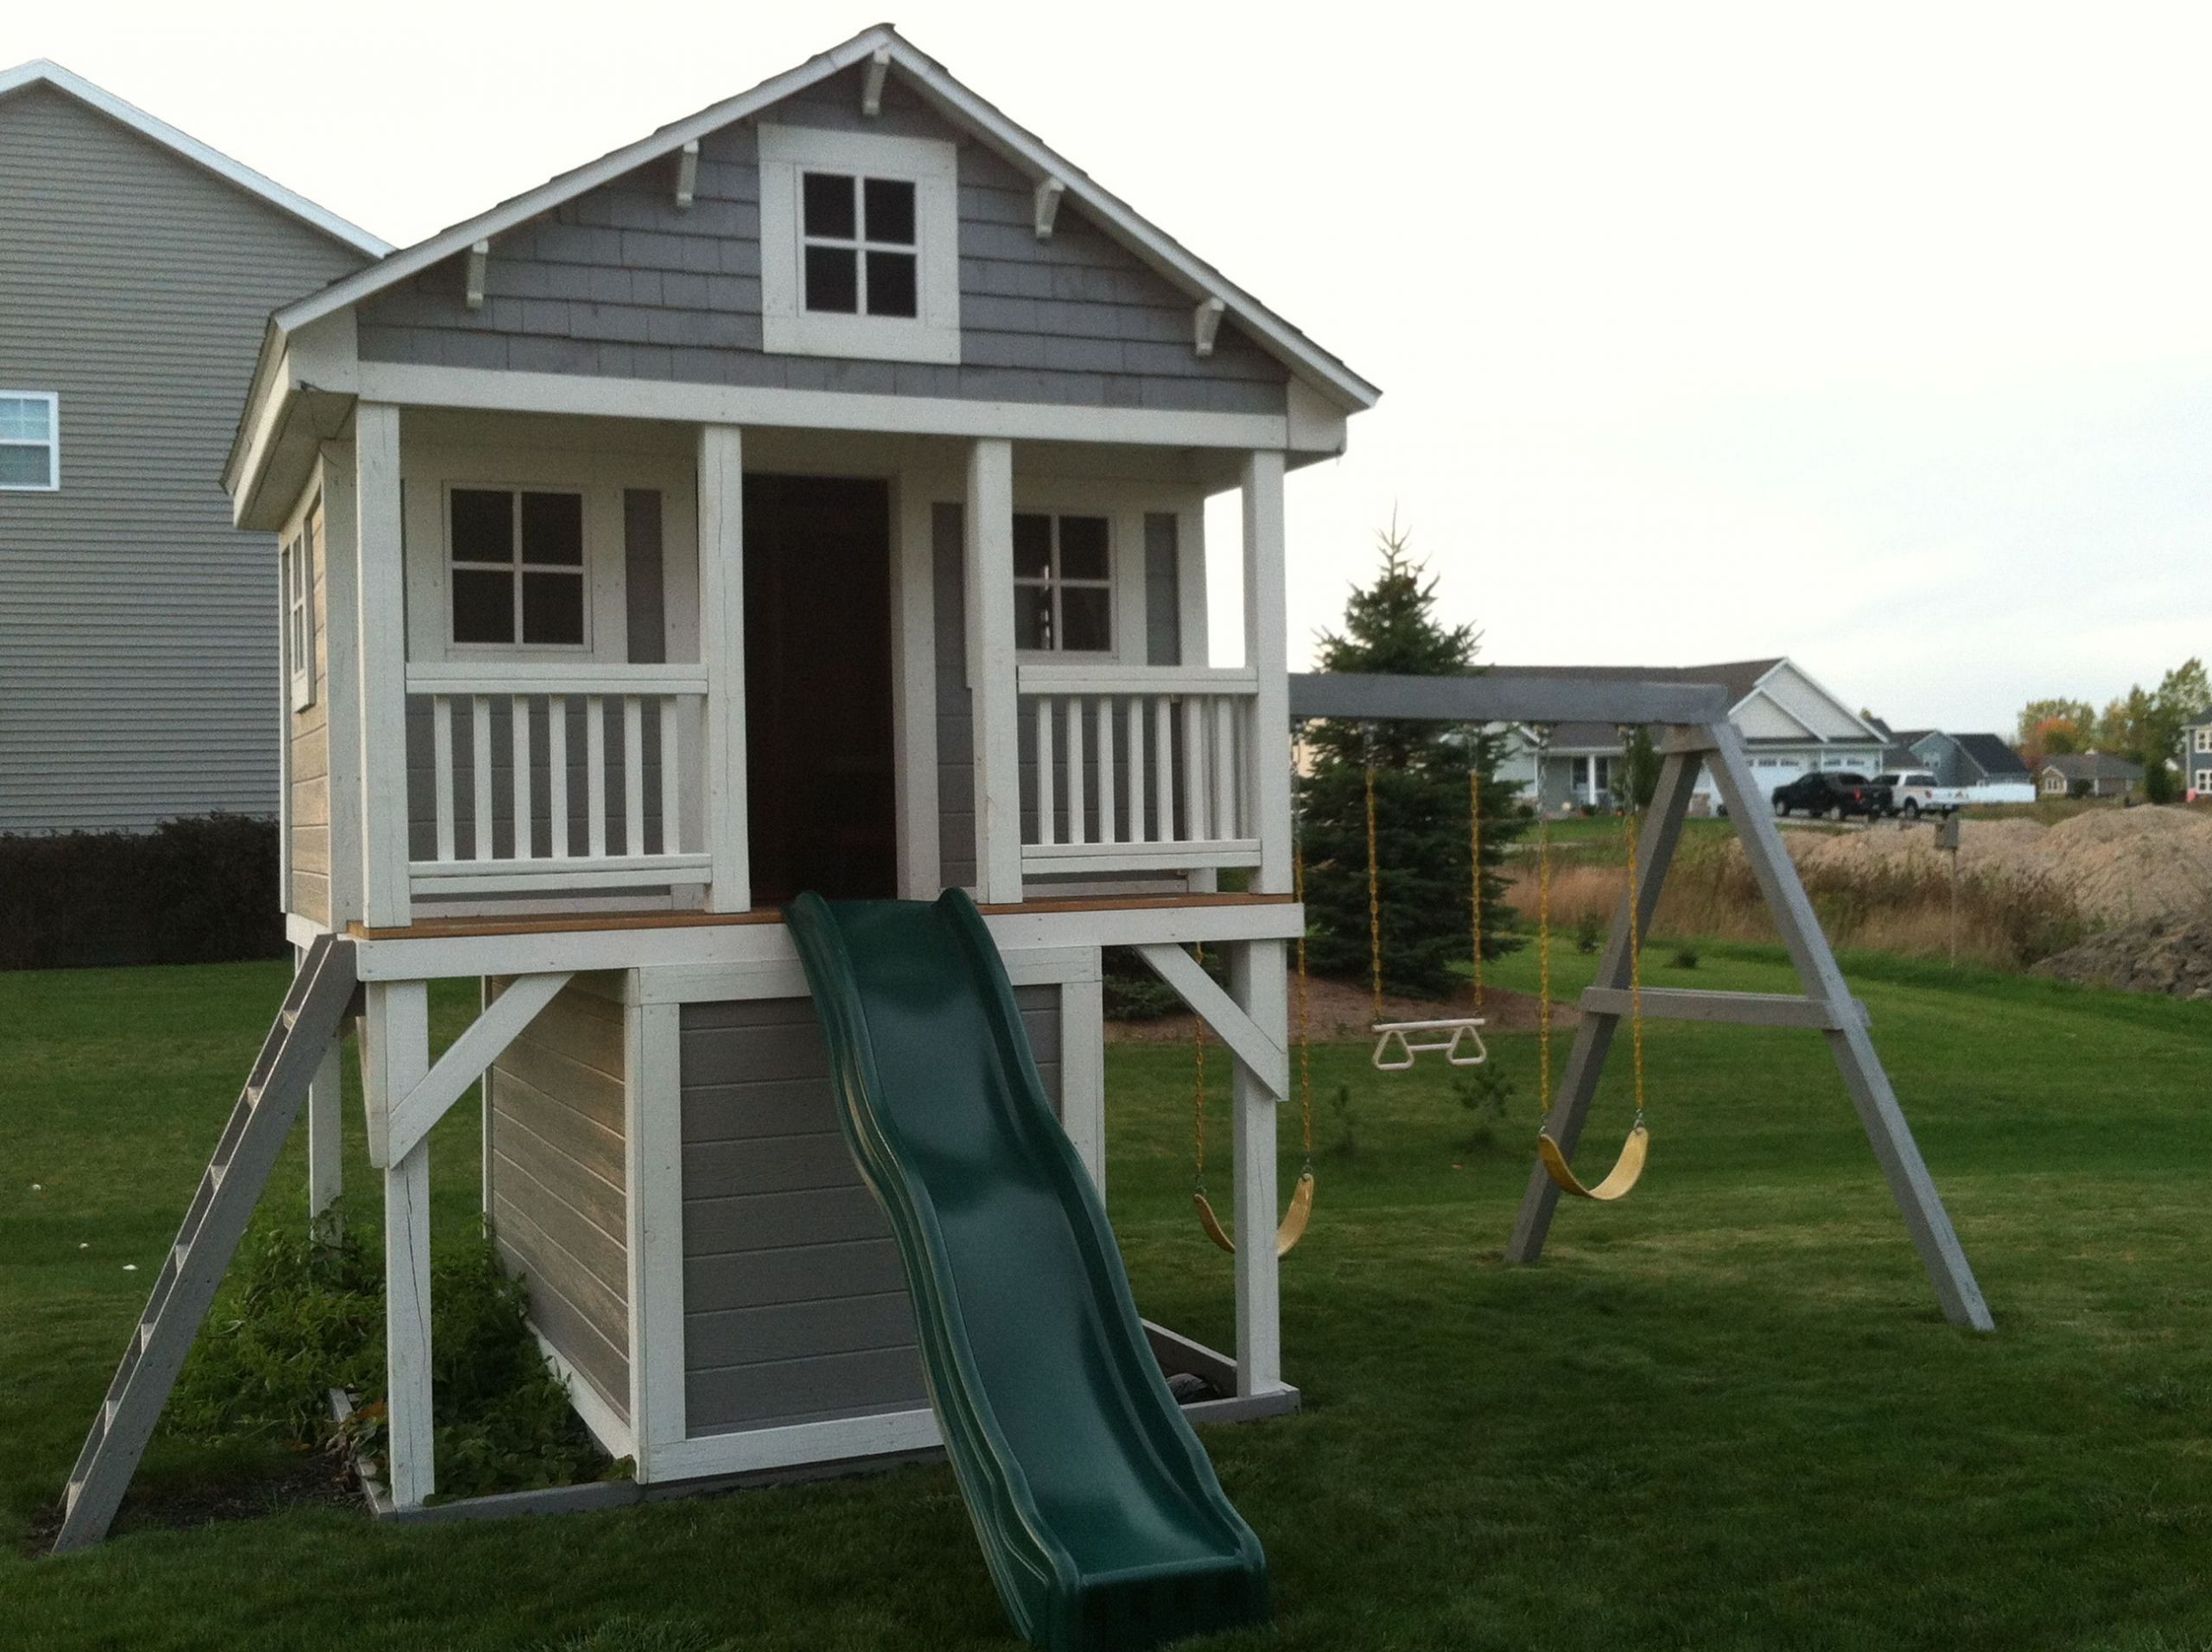 Kids Playhouse With Swing
 Kids playhouse turn our swing set into this maybe